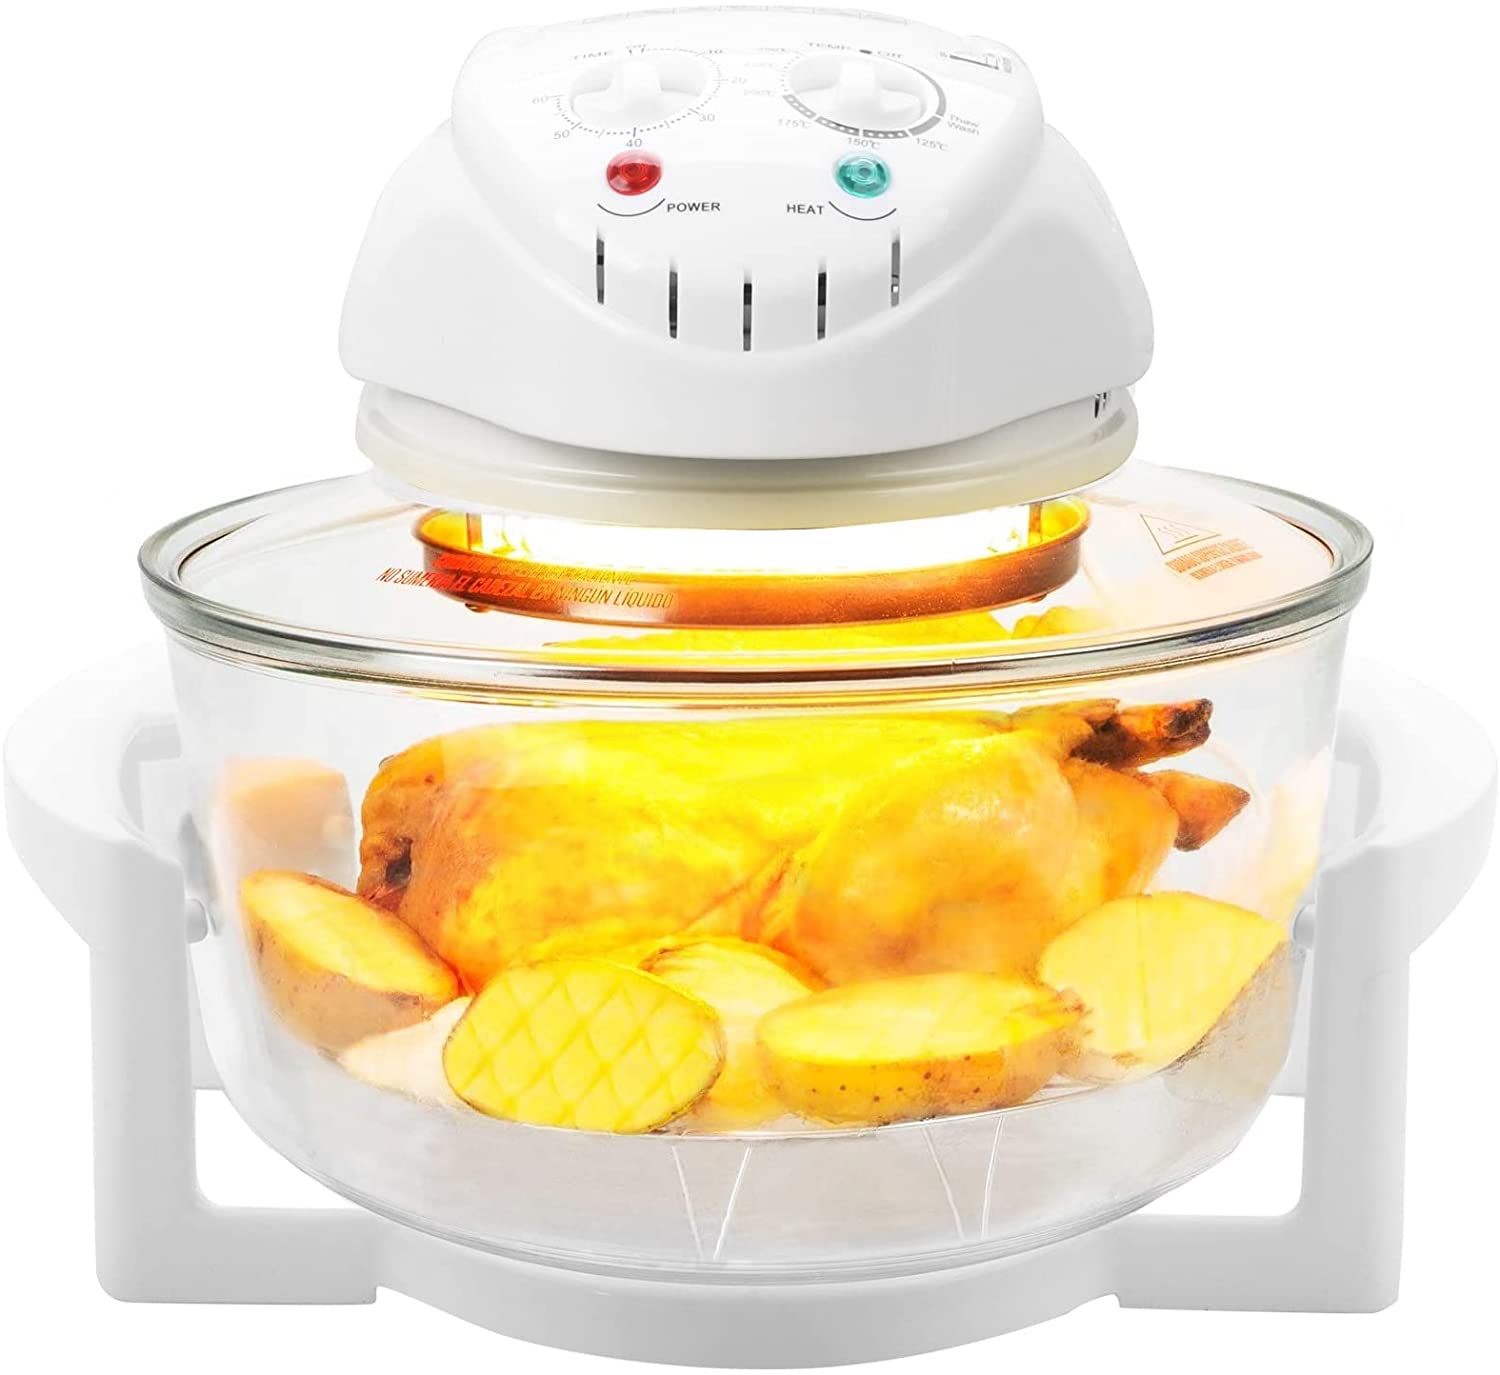 YORKING Halogen Oven Hot Air Oven Small 17 Litres with Extension Ring Hot Air Oven 1400 Watt White Halogen Oven for Vegetables Meat